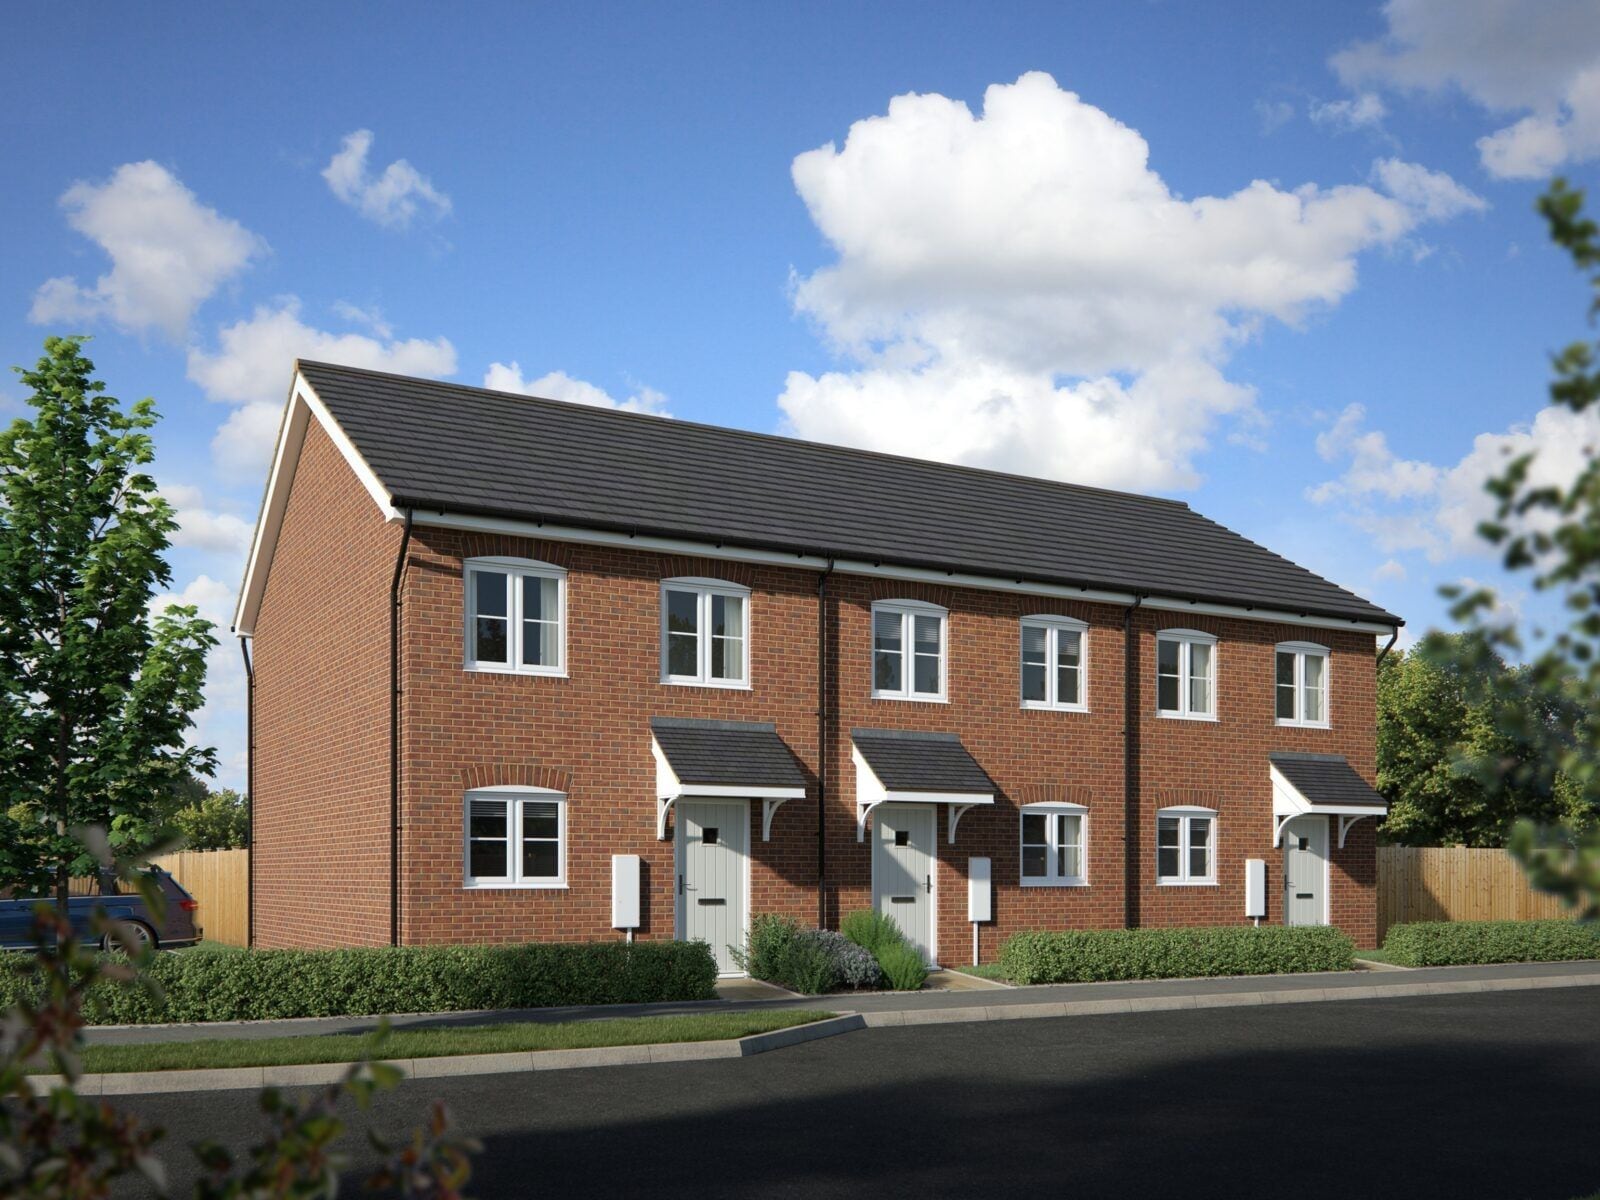 Bromford showcases new home style at Stafford development